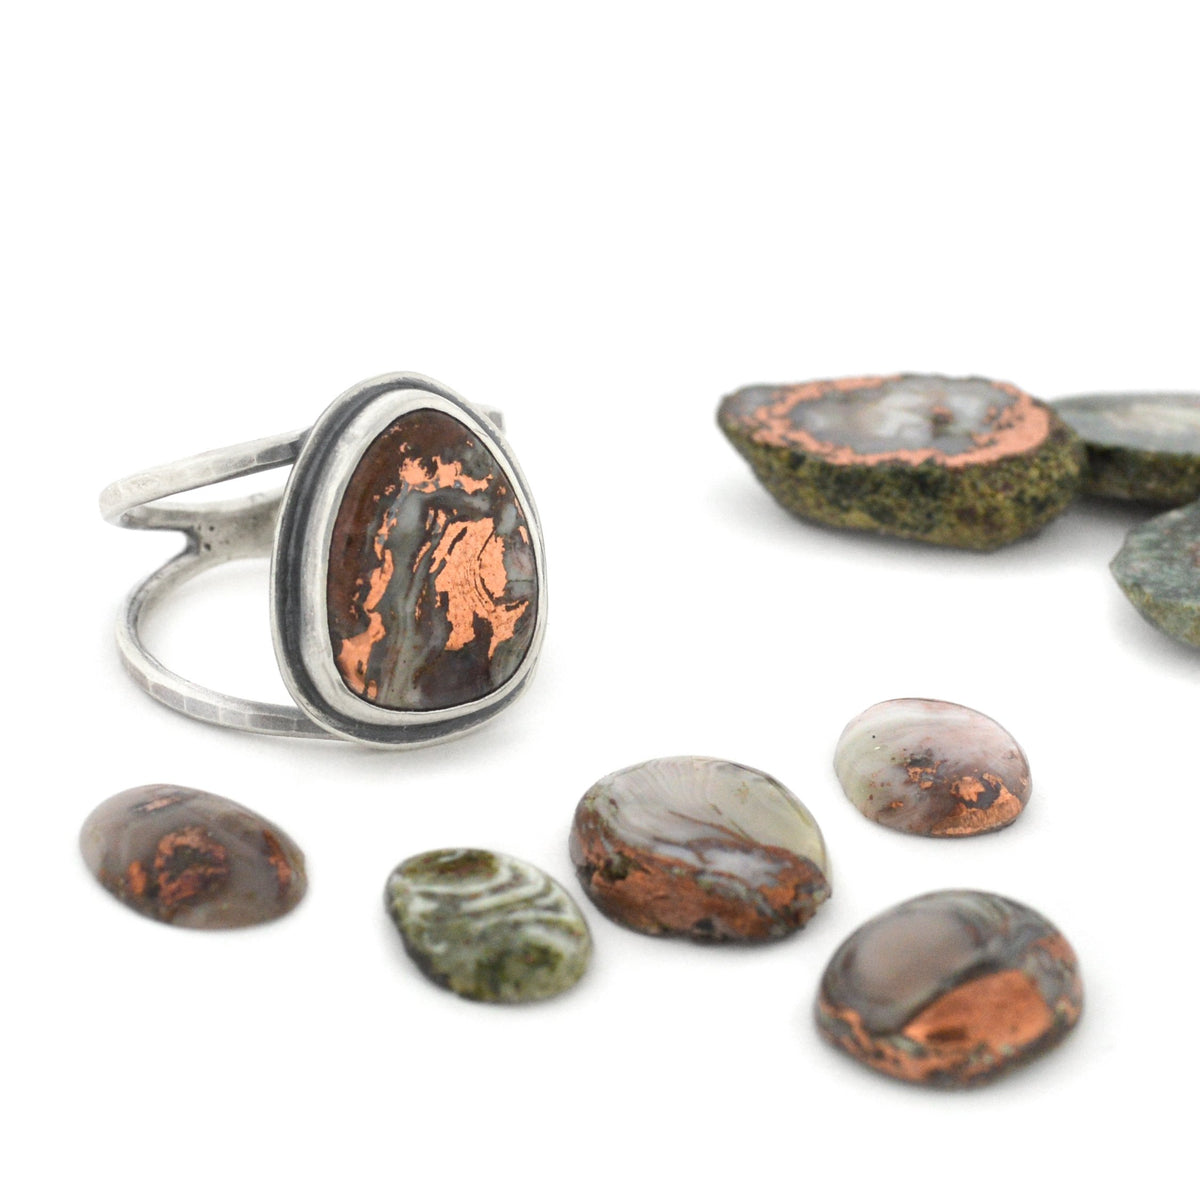 Copper Agate Ring - Choose Your Own Stone - Ring A. 11mm x 9mm / Lake Superior Copper Agate B. 11mm x 9mm / Lake Superior Copper Agate 2669 - handmade by Beth Millner Jewelry